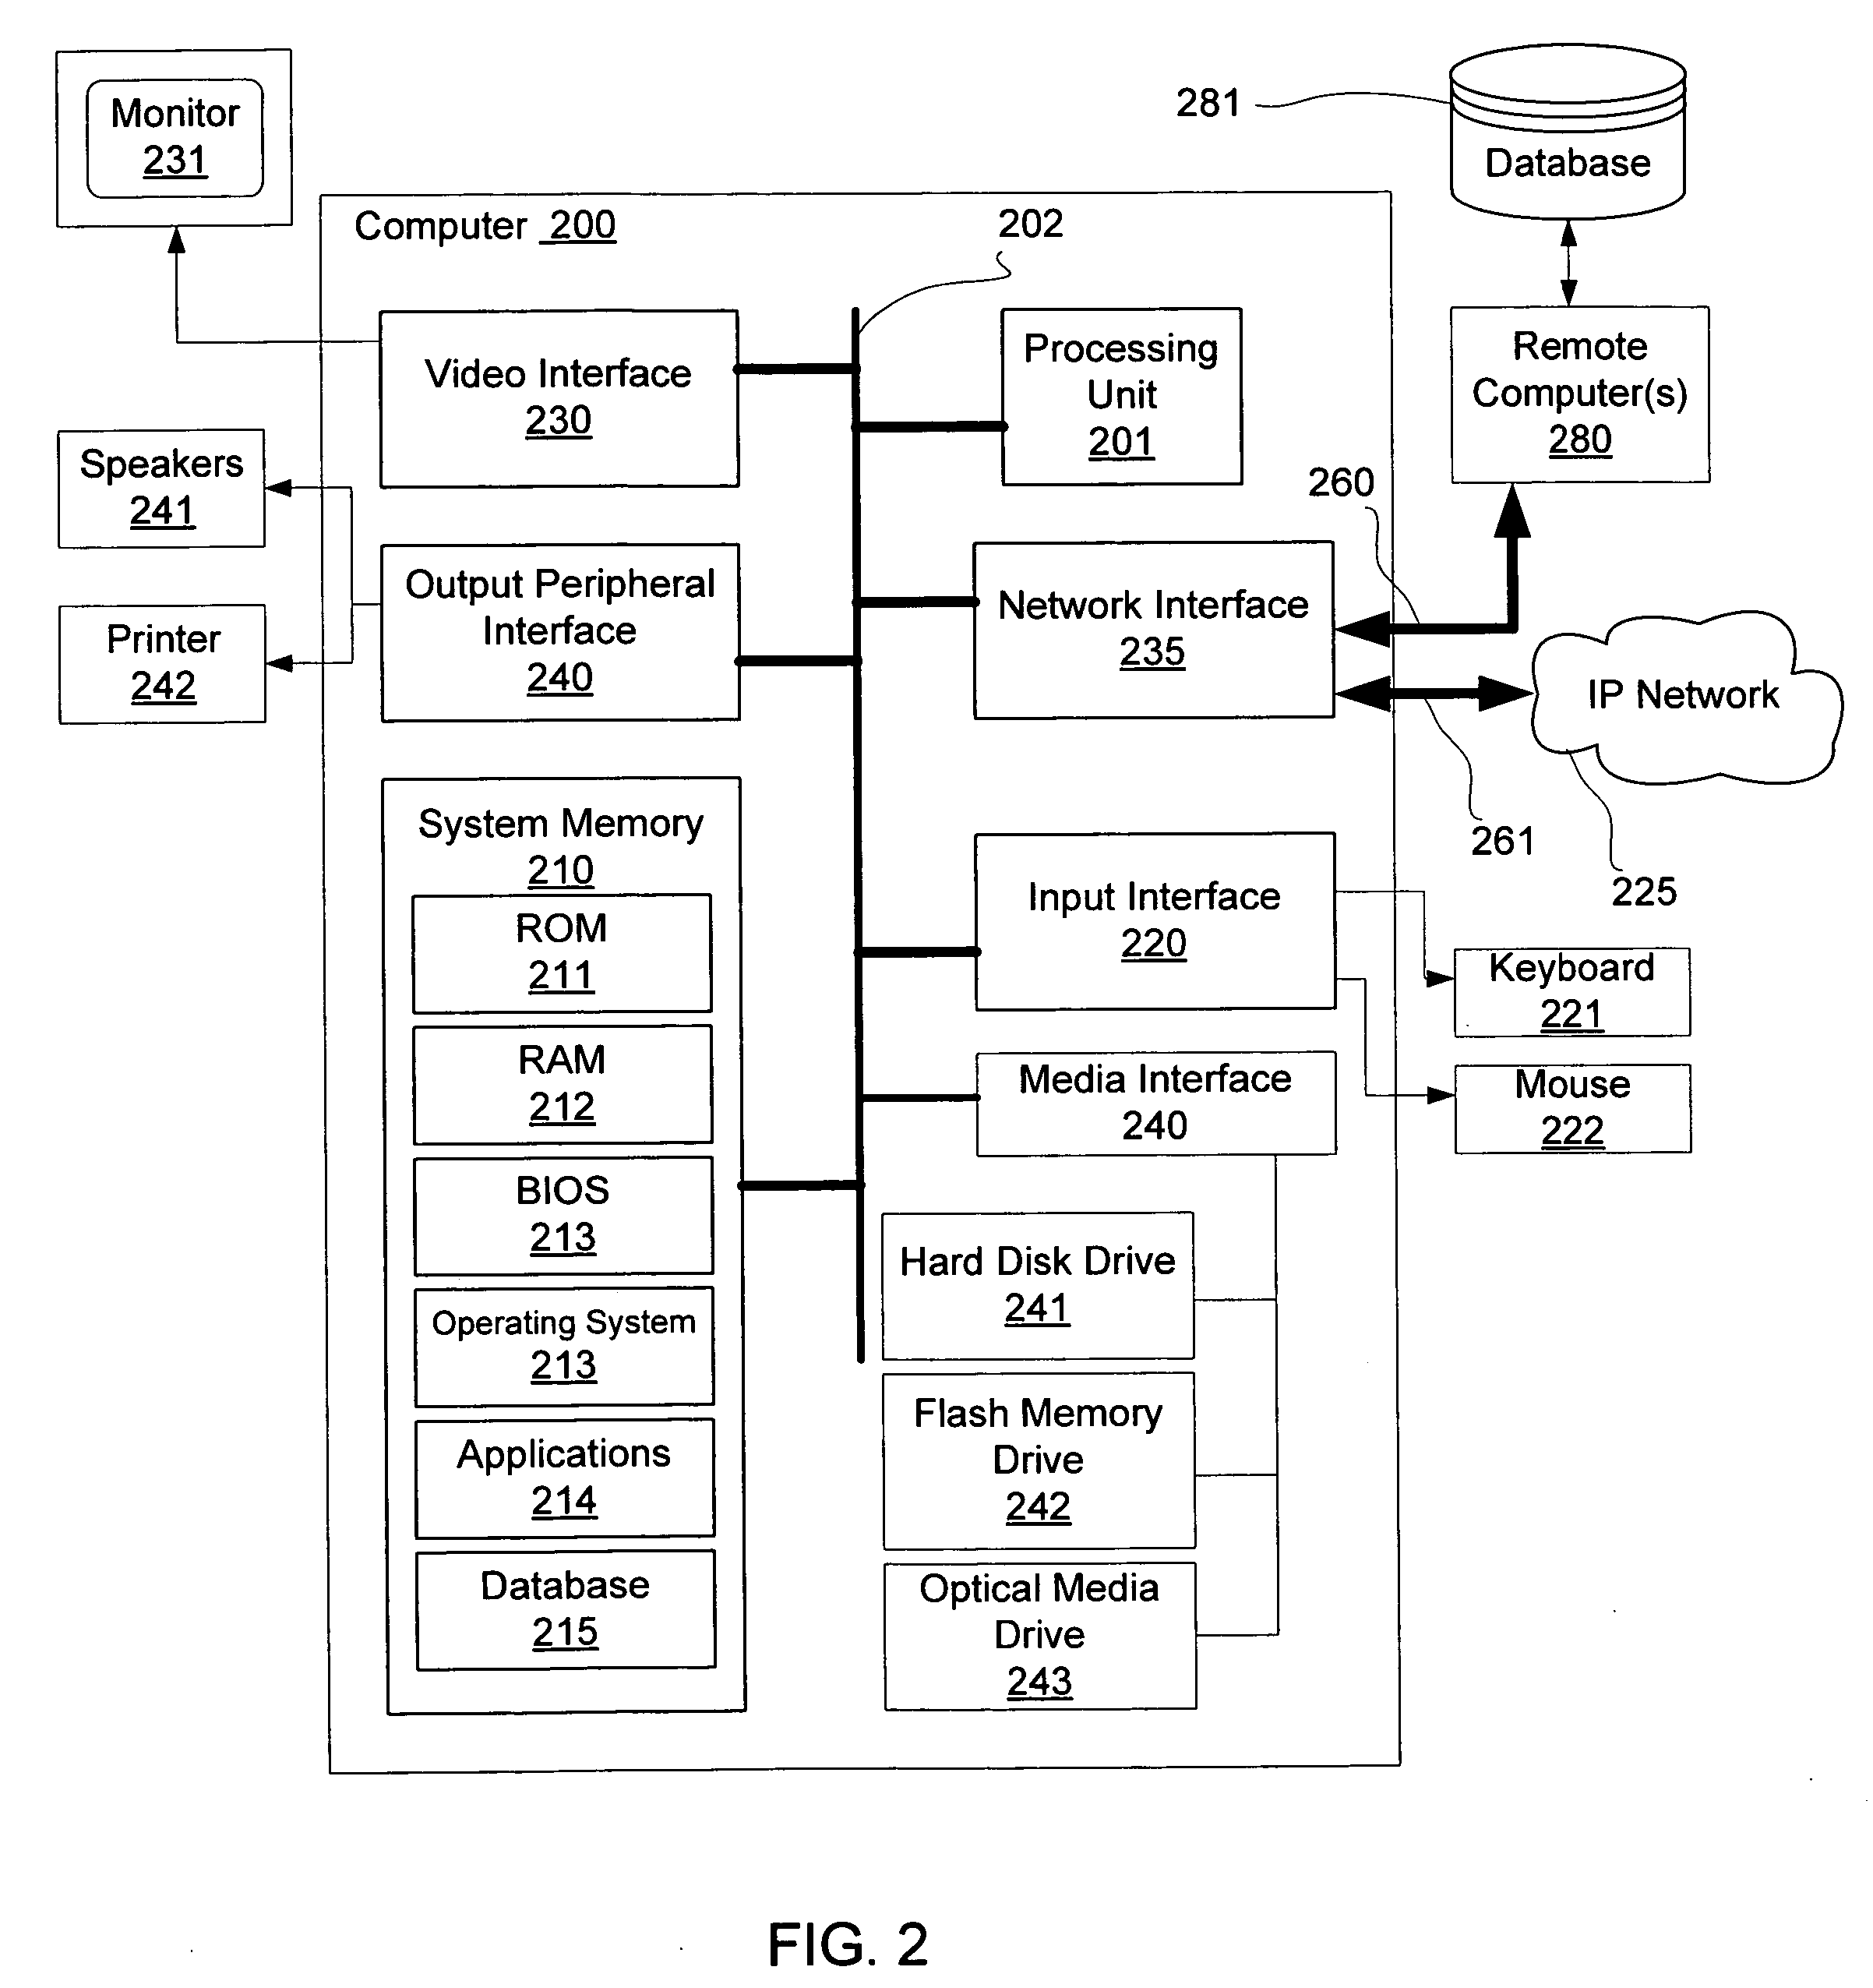 System and method for communications in a multi-platform environment